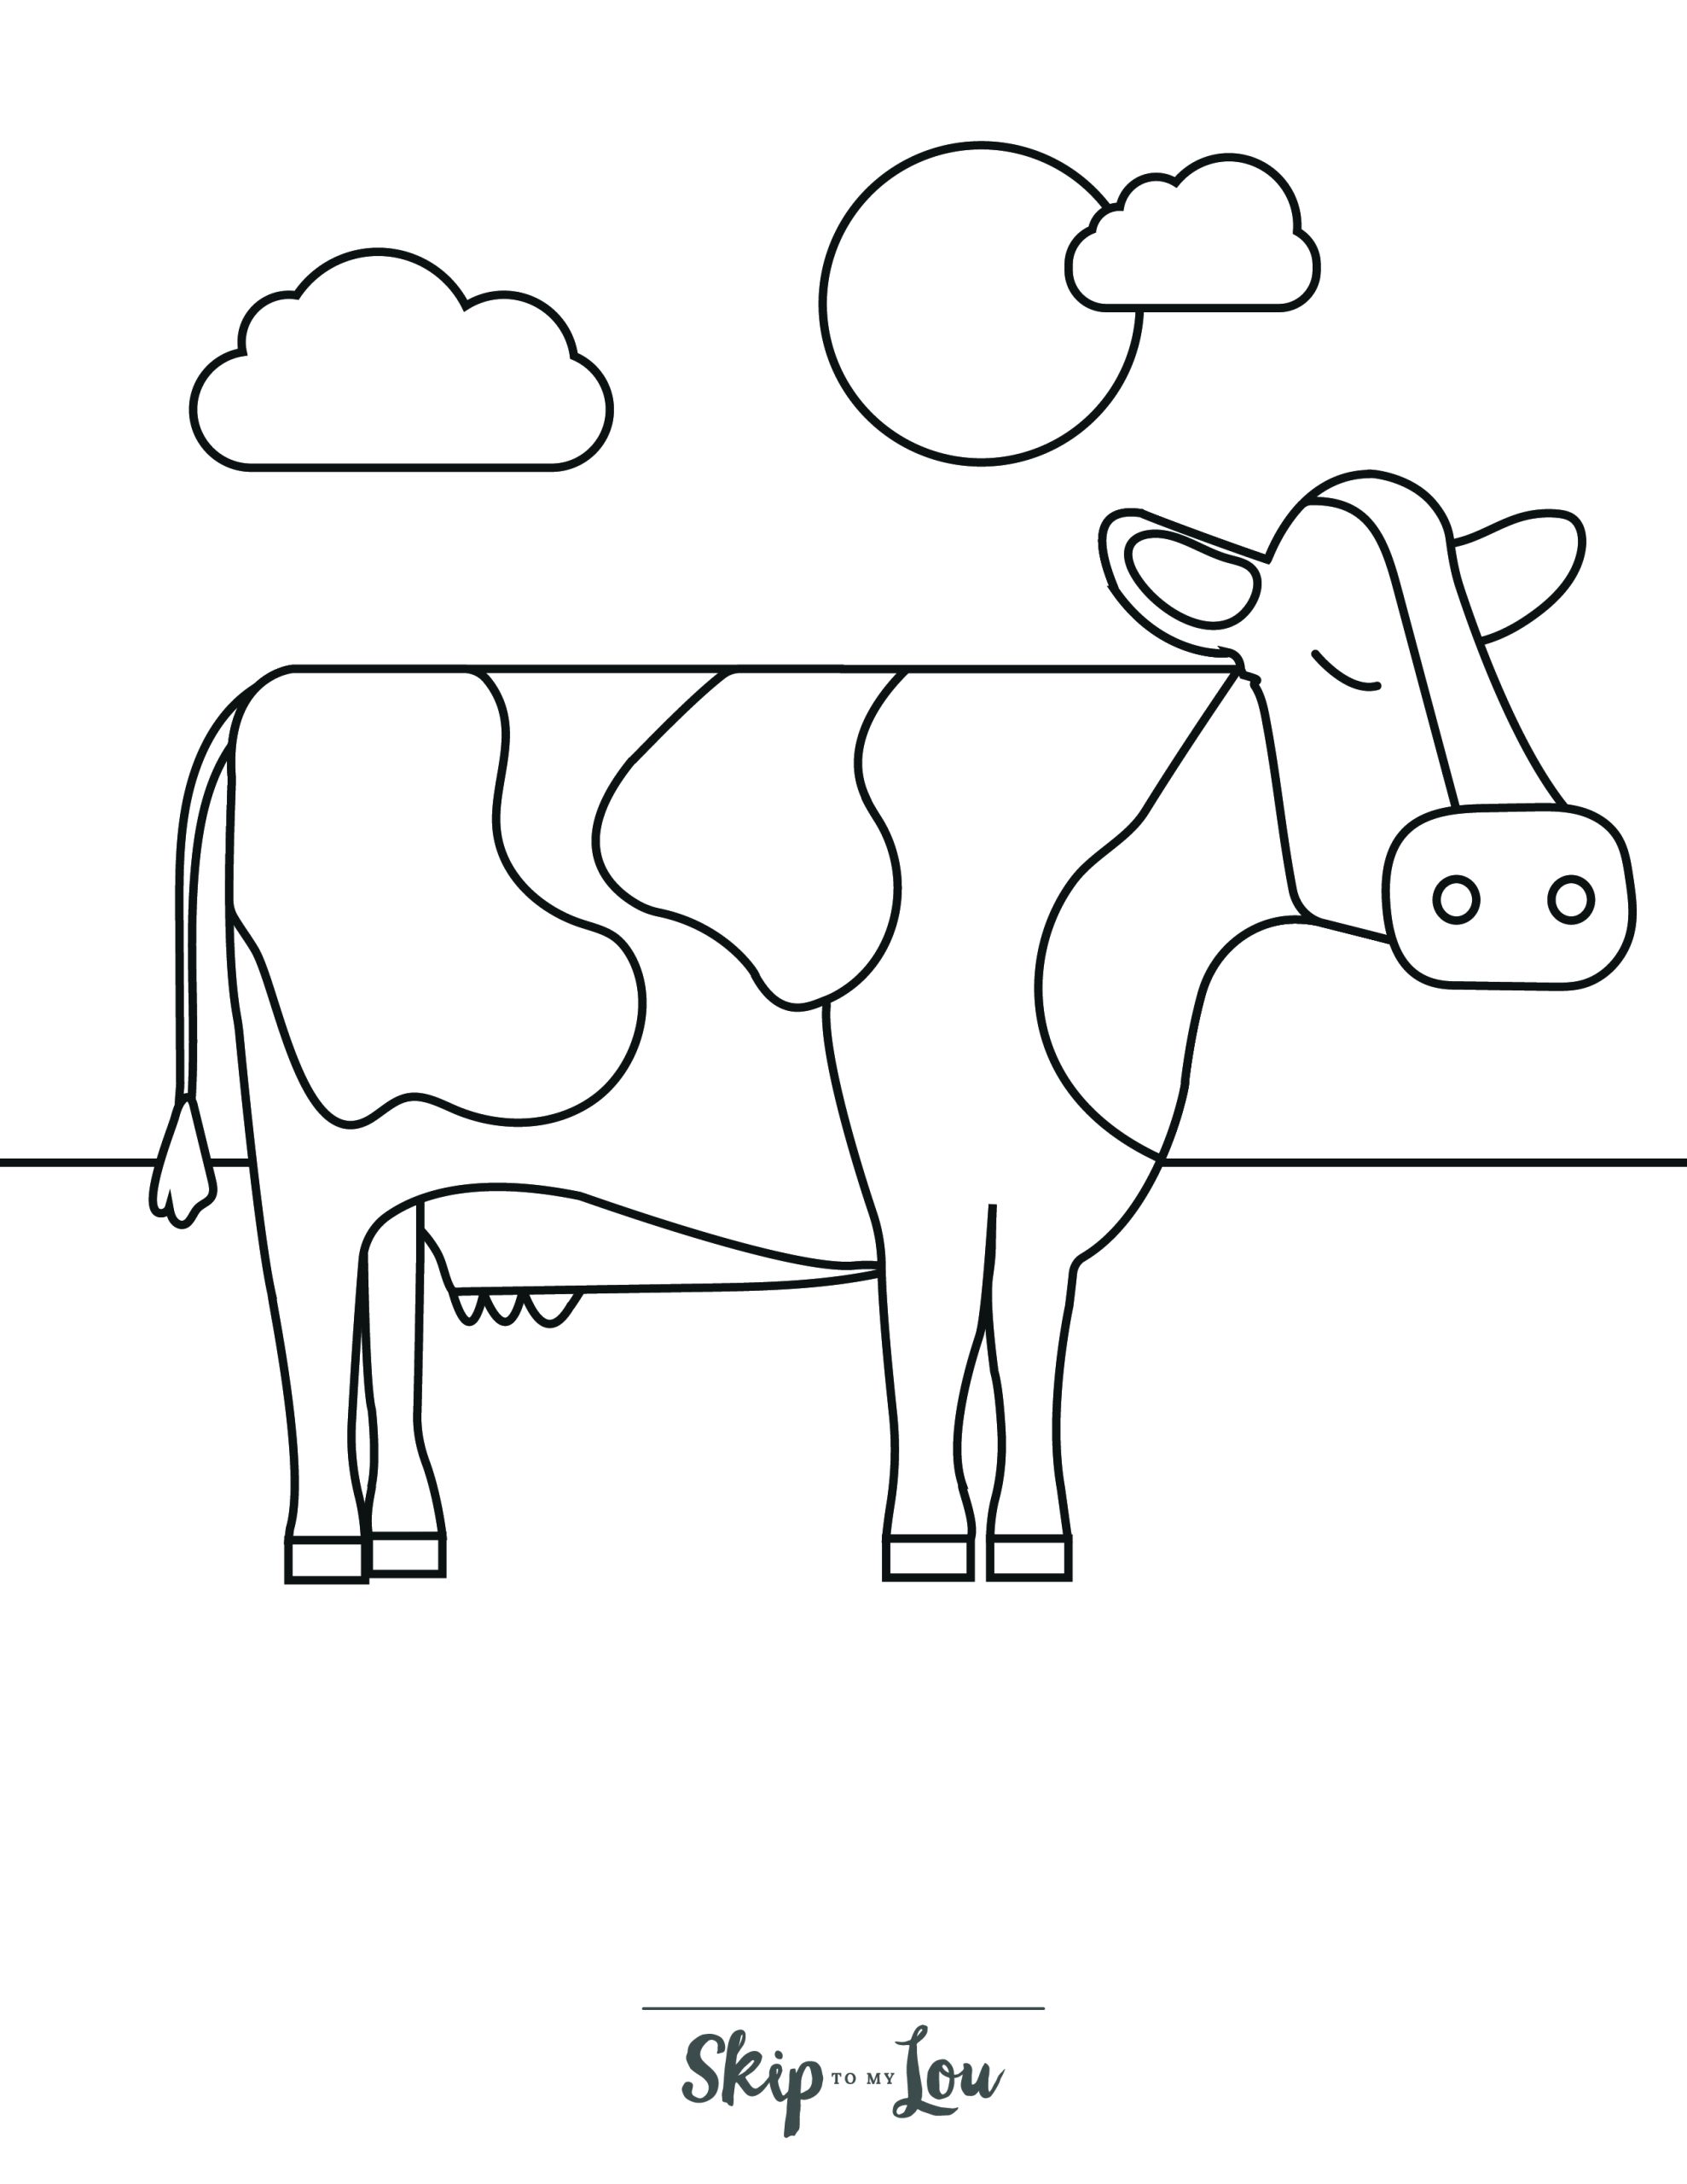 Free printable cow coloring pages with pdf download skip to my lou